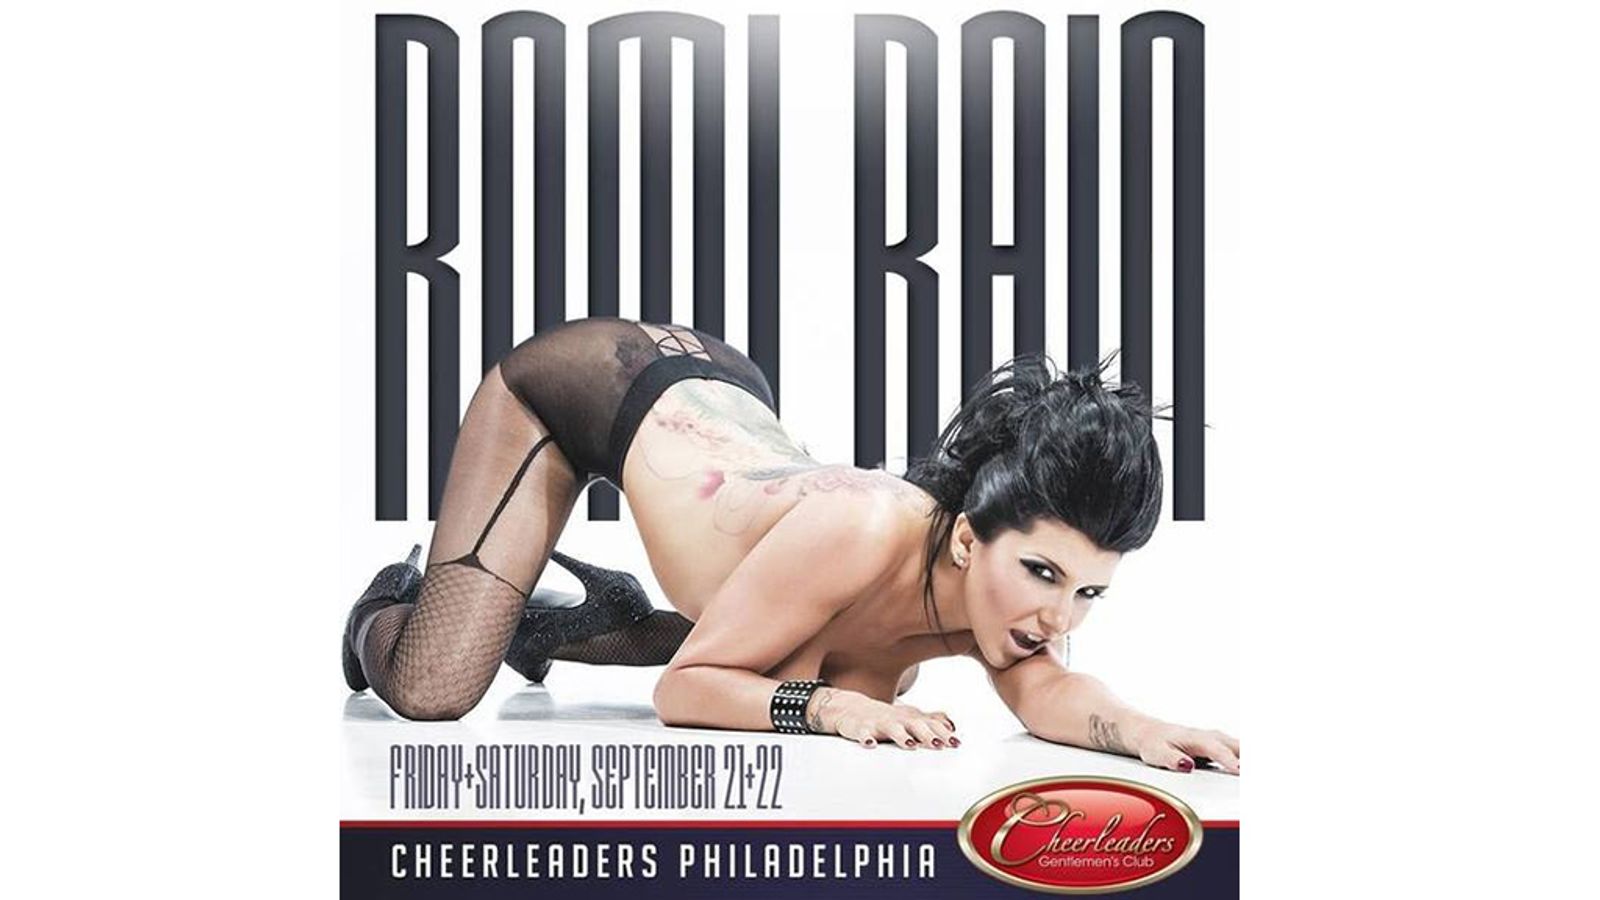 Romi Rain Off To Philly For Gig At Cheerleaders Gentlemen’s Club